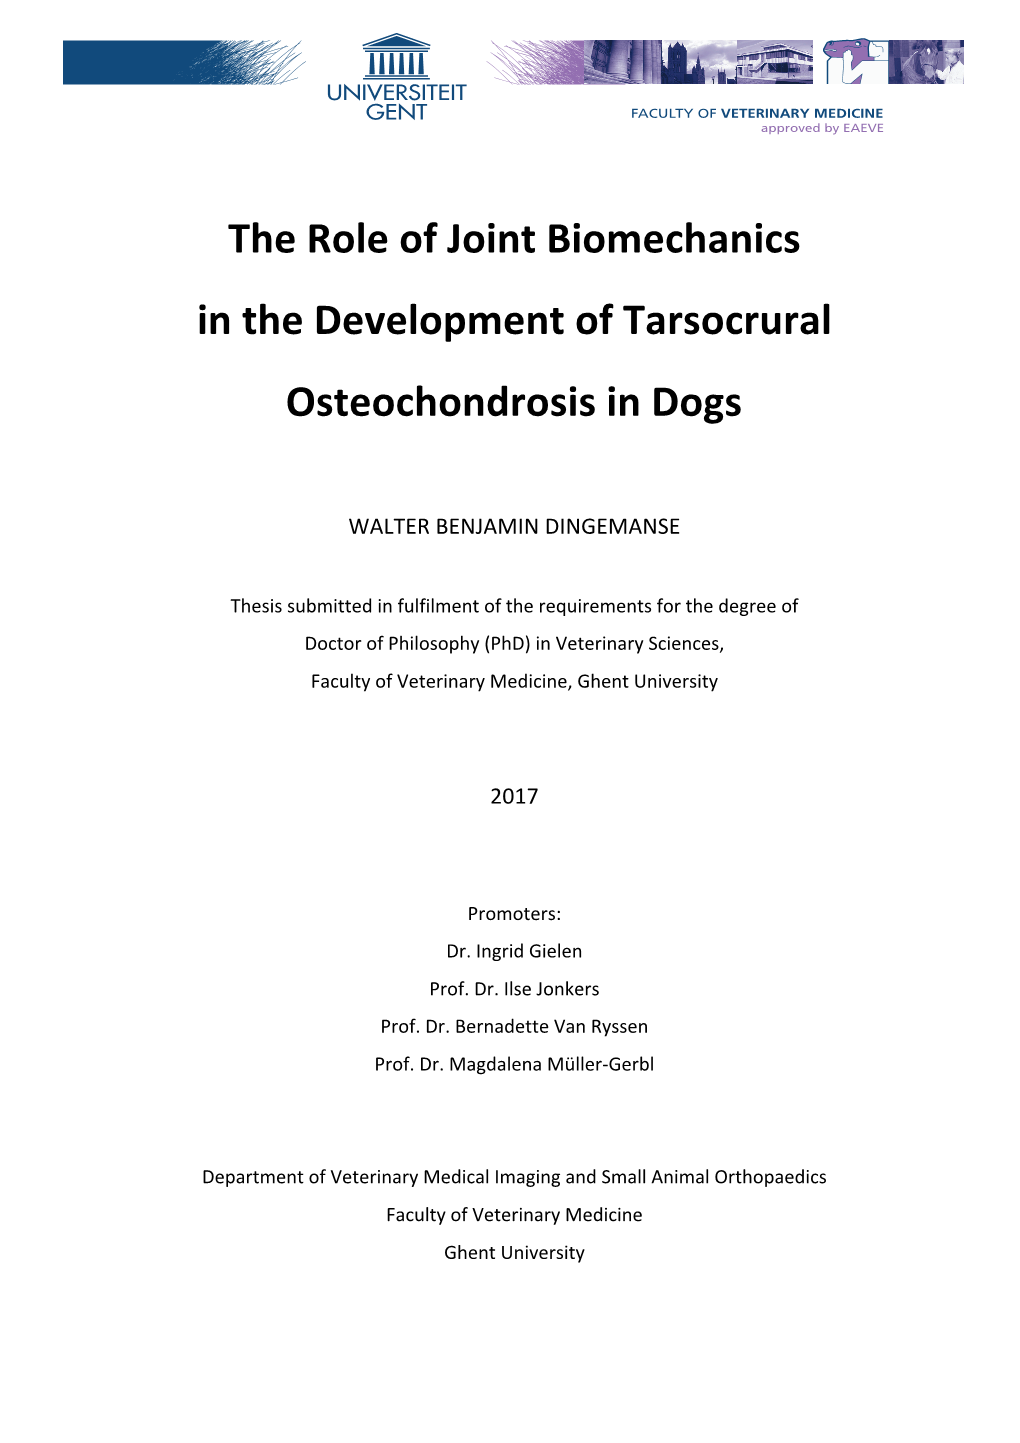 The Role of Joint Biomechanics in the Development of Tarsocrural Osteochondrosis in Dogs